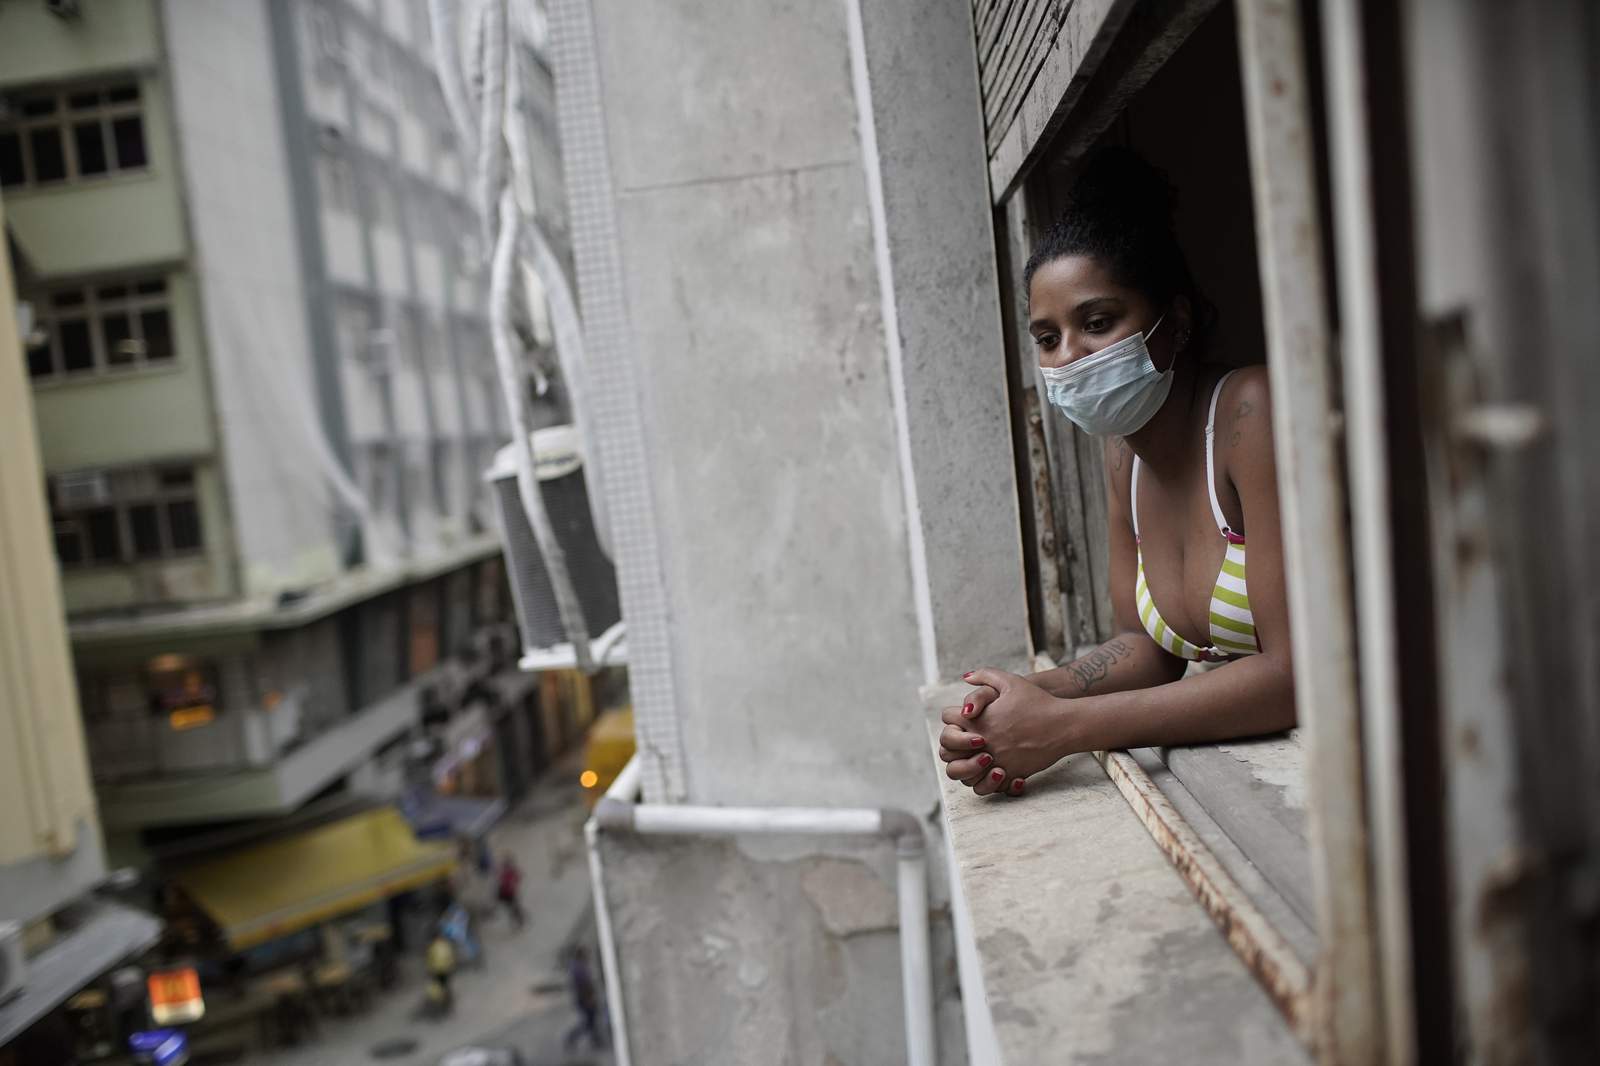 In Brazil, moms are bearing the brunt of pandemic's blow